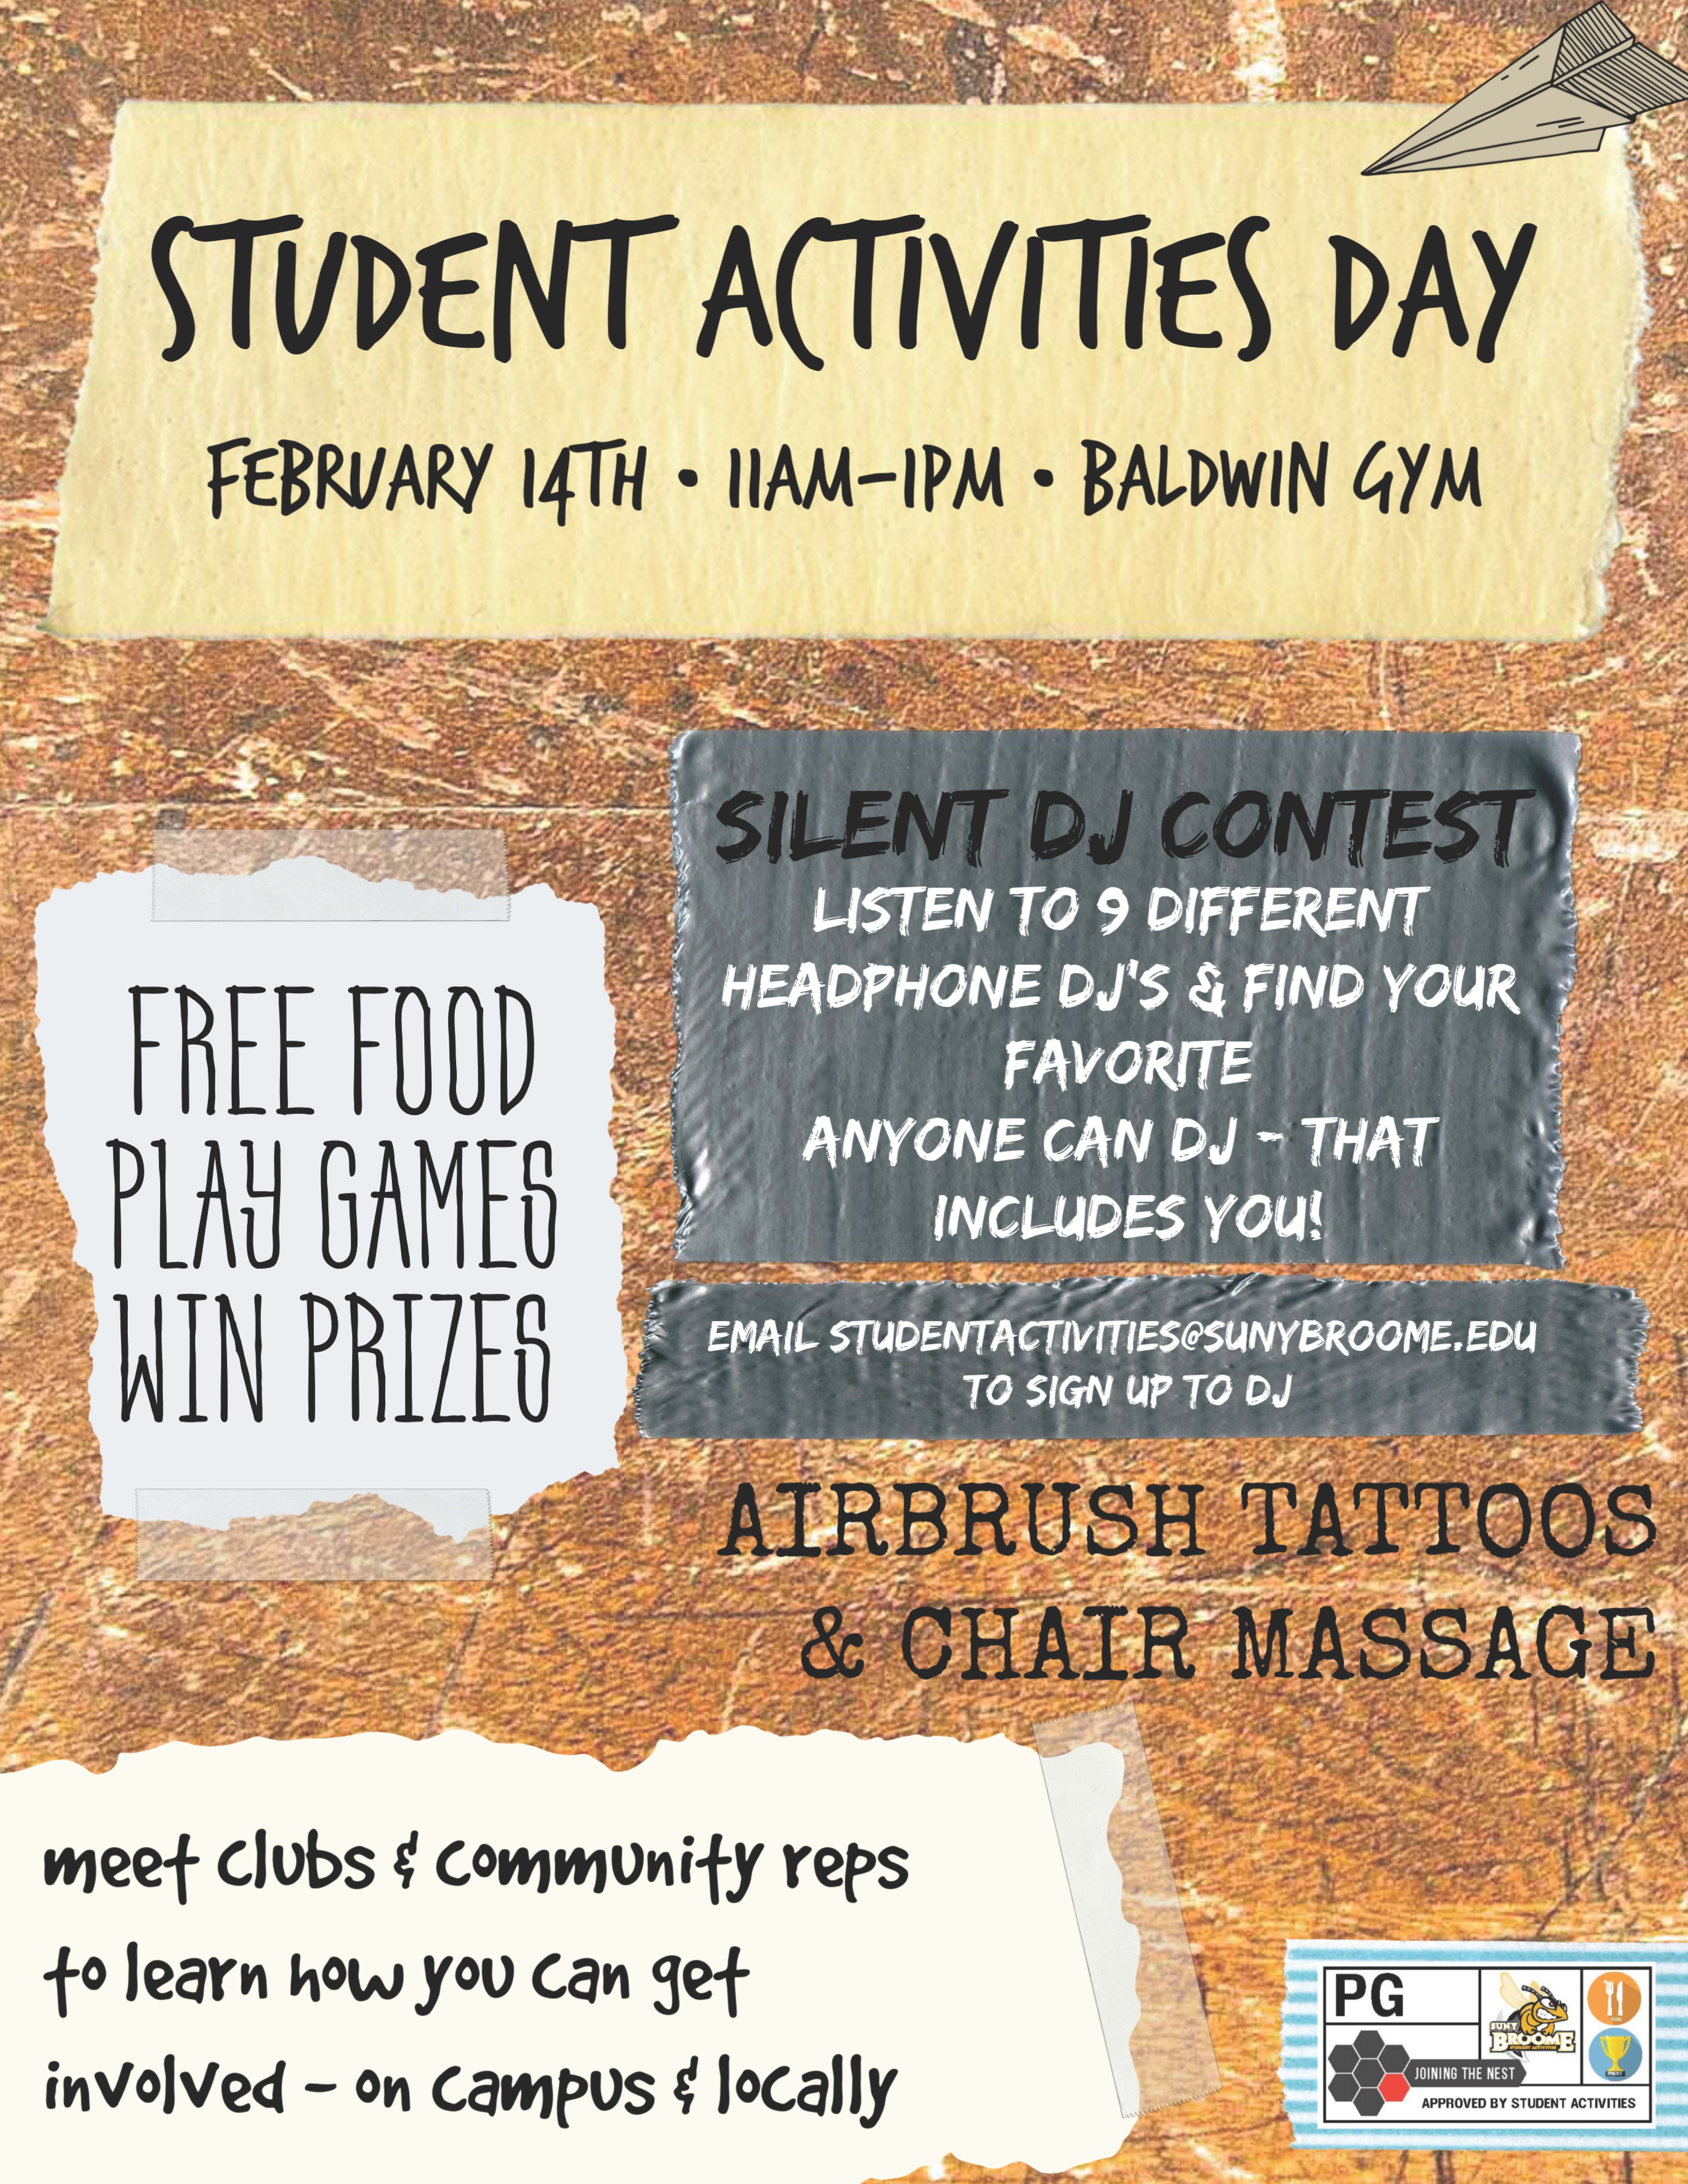 Get involved, have fun: Student Activities Day on Feb. 14